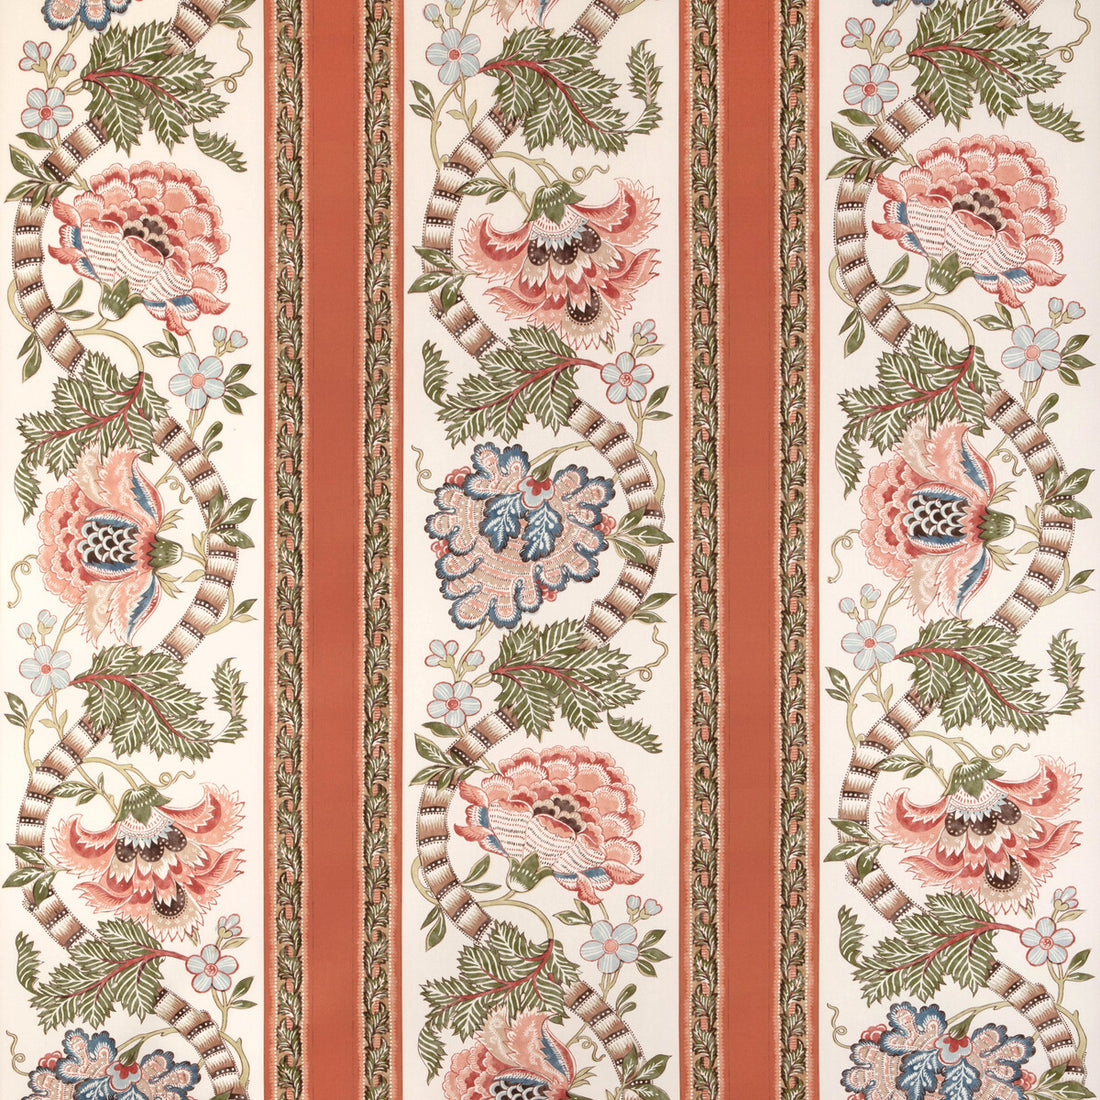 Lauris Print fabric in apricot/sage color - pattern 8023106.312.0 - by Brunschwig &amp; Fils in the Cadenet collection